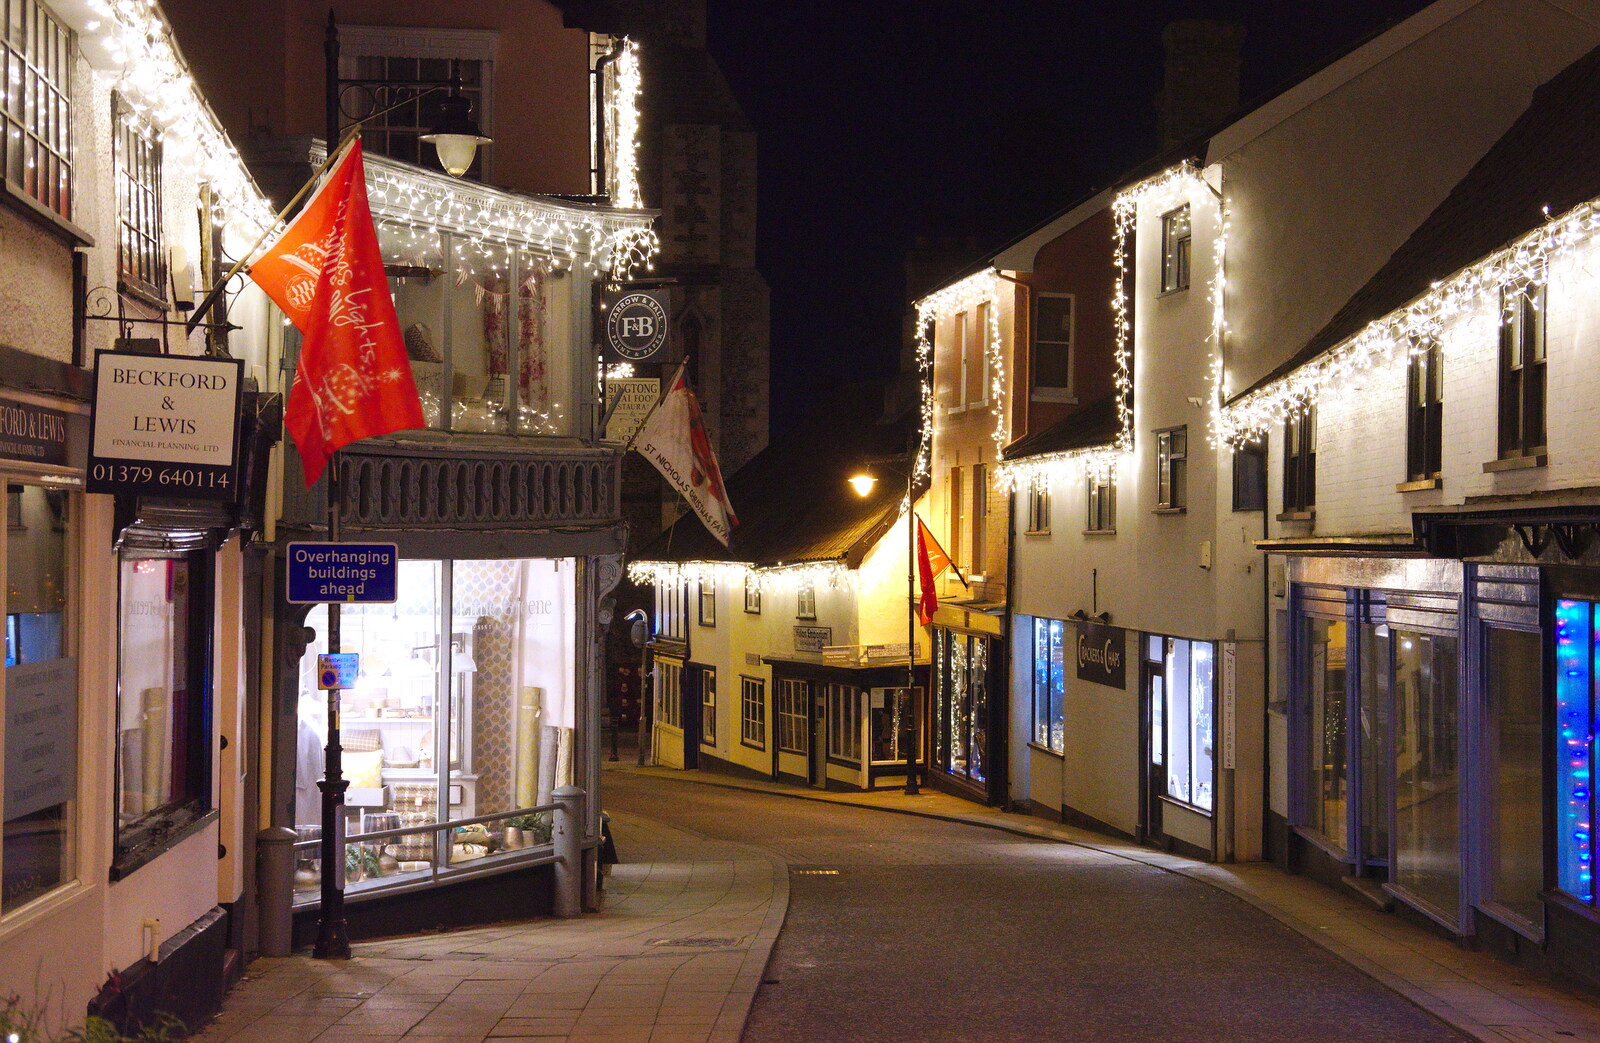 Further down St. Nicholas Street from Diss Panto and the Christmas Lights, Diss, Norfolk - 27th December 2019